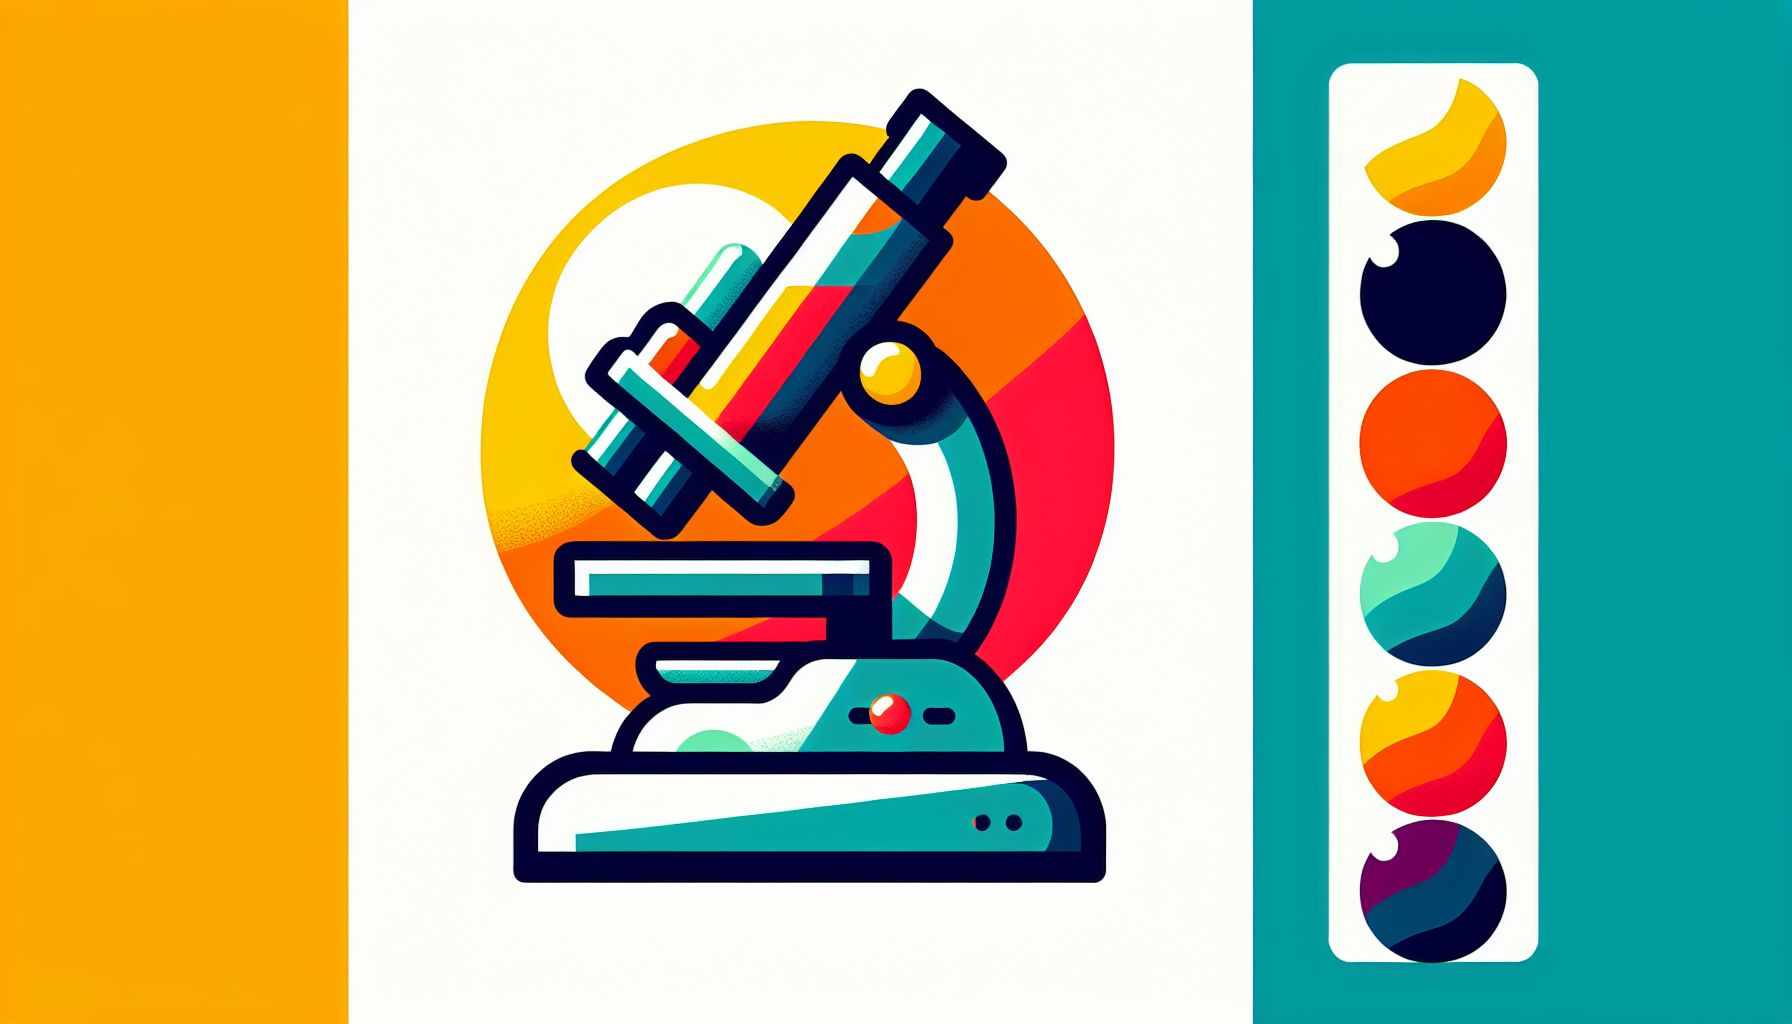 Microscope in flat illustration style and white background, red #f47574, green #88c7a8, yellow #fcc44b, and blue #645bc8 colors.